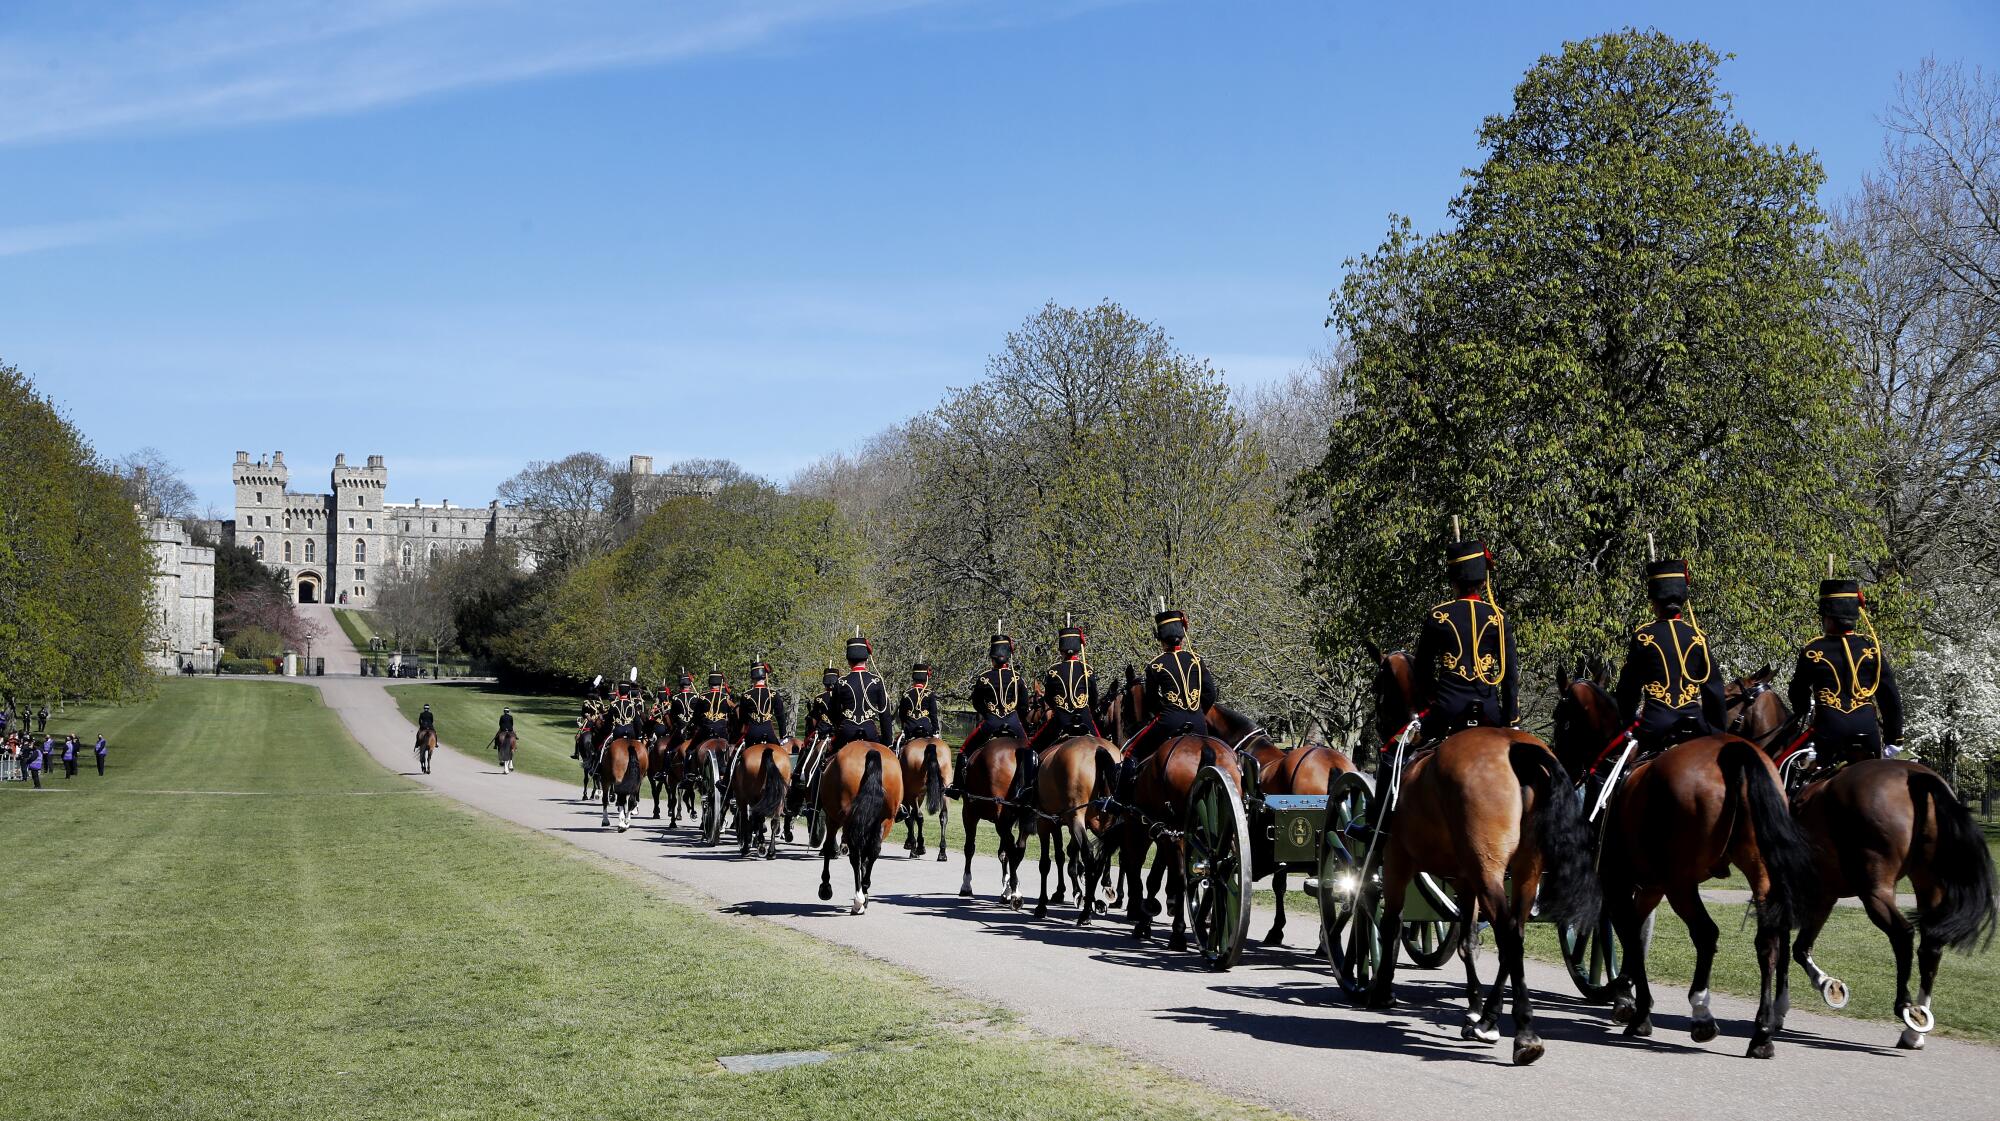 The King's Troop Royal Horse Artillery rides on a road toward Windsor Castle past trees and grass.